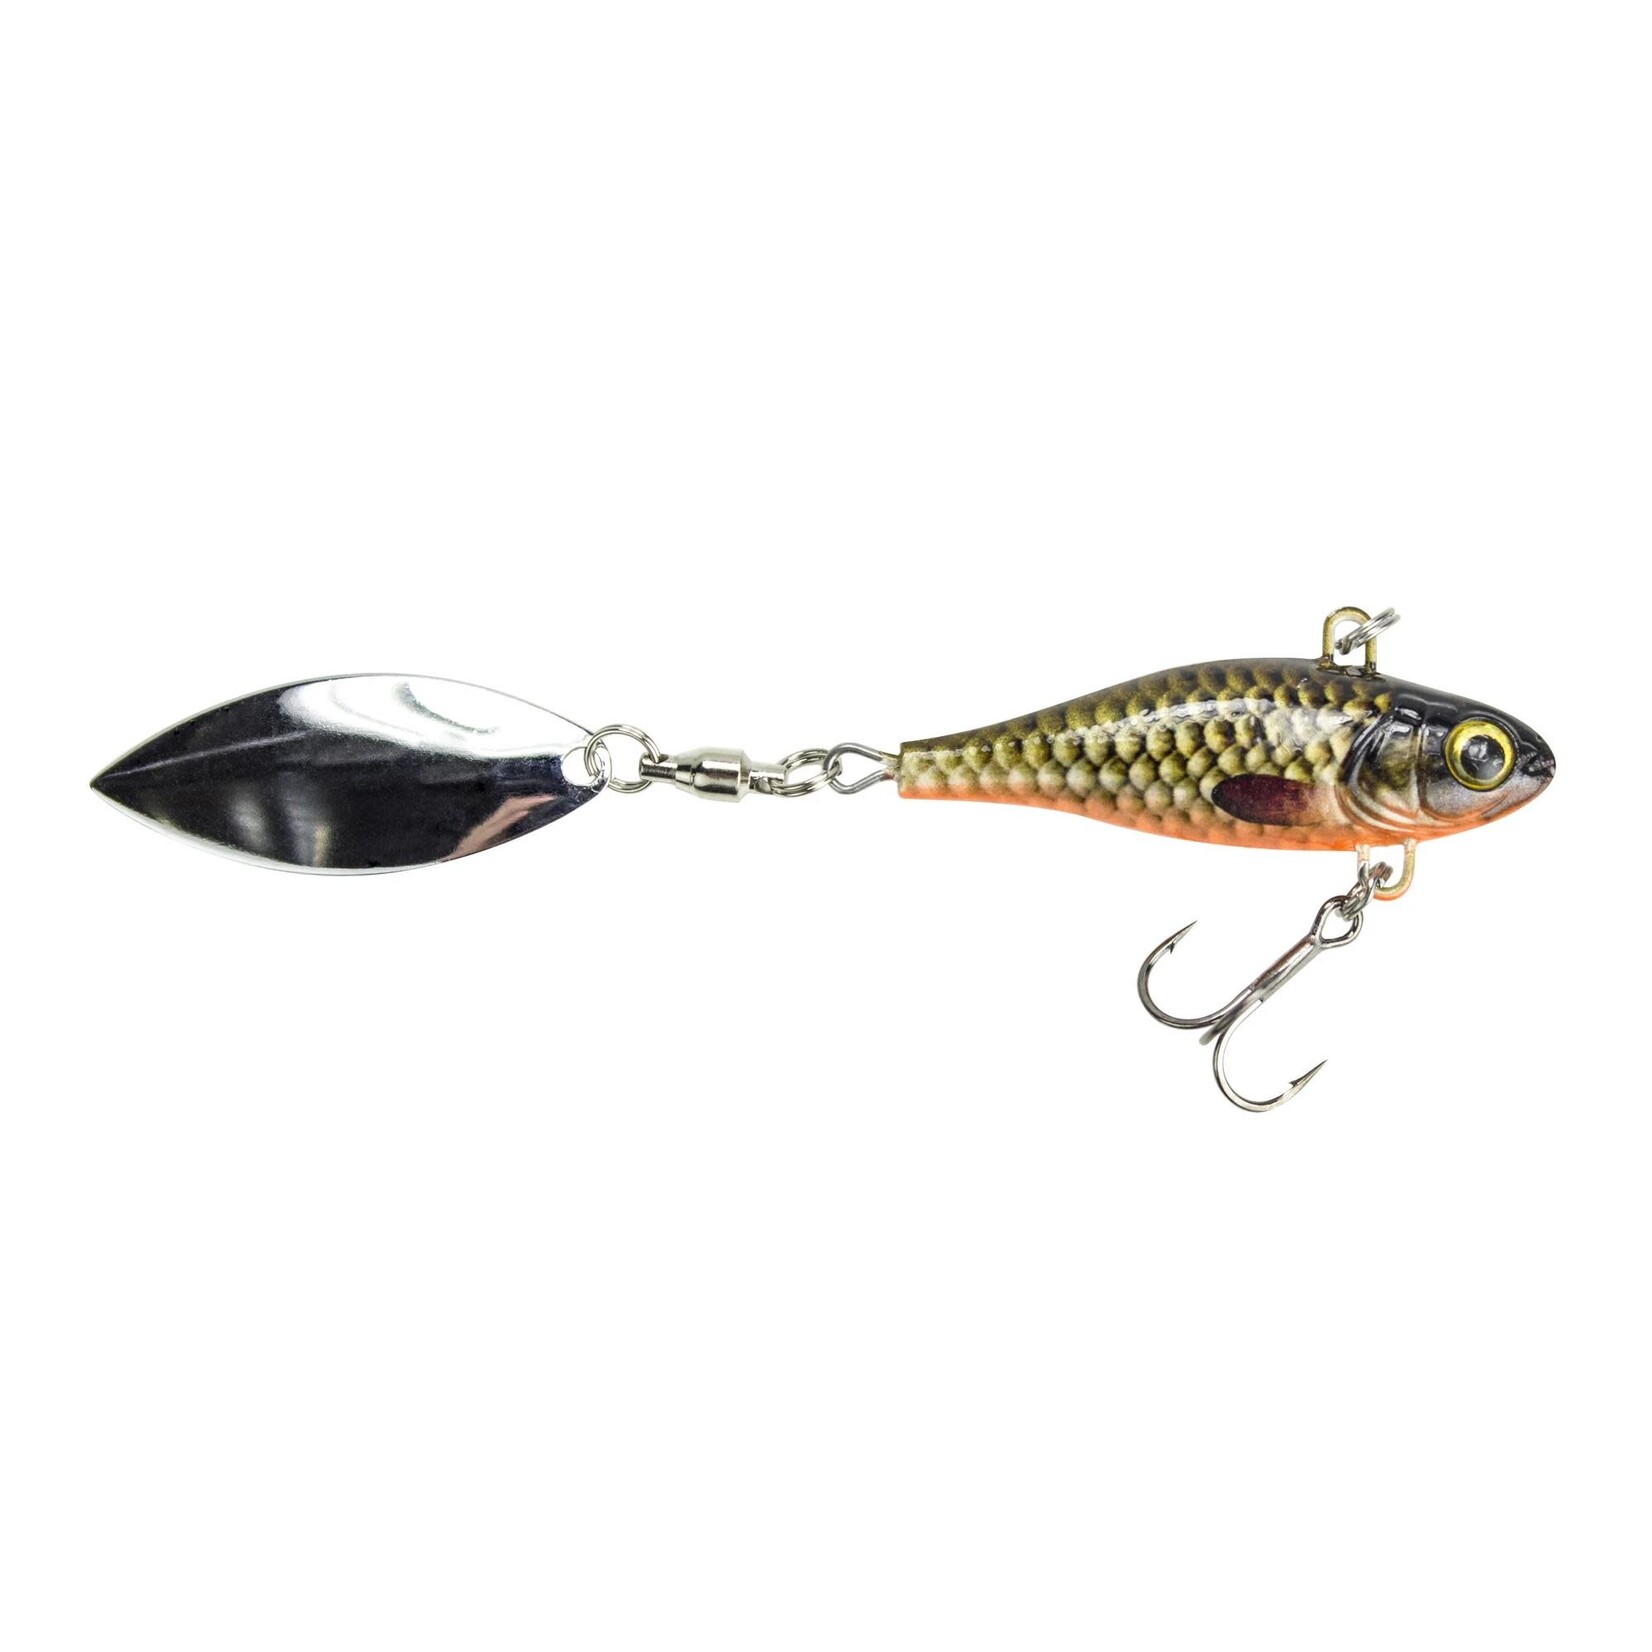 Lunkerhunt Lunkerhunt 2" Hatch Spin Lipless Crankbait with Spinner Tail